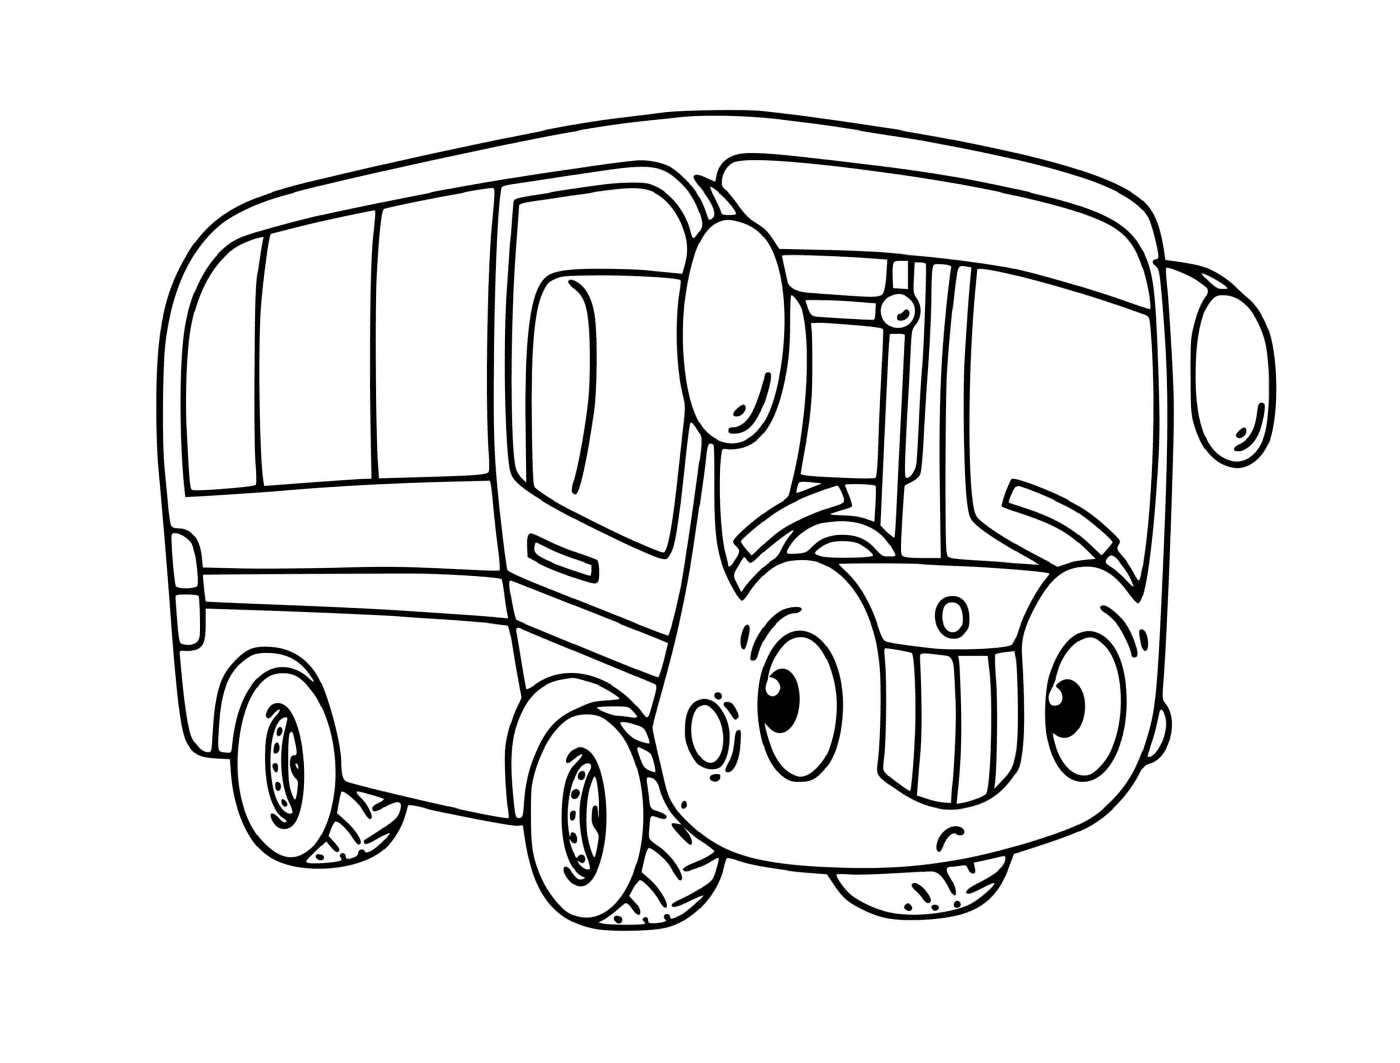  Transportation of children to school by bus 